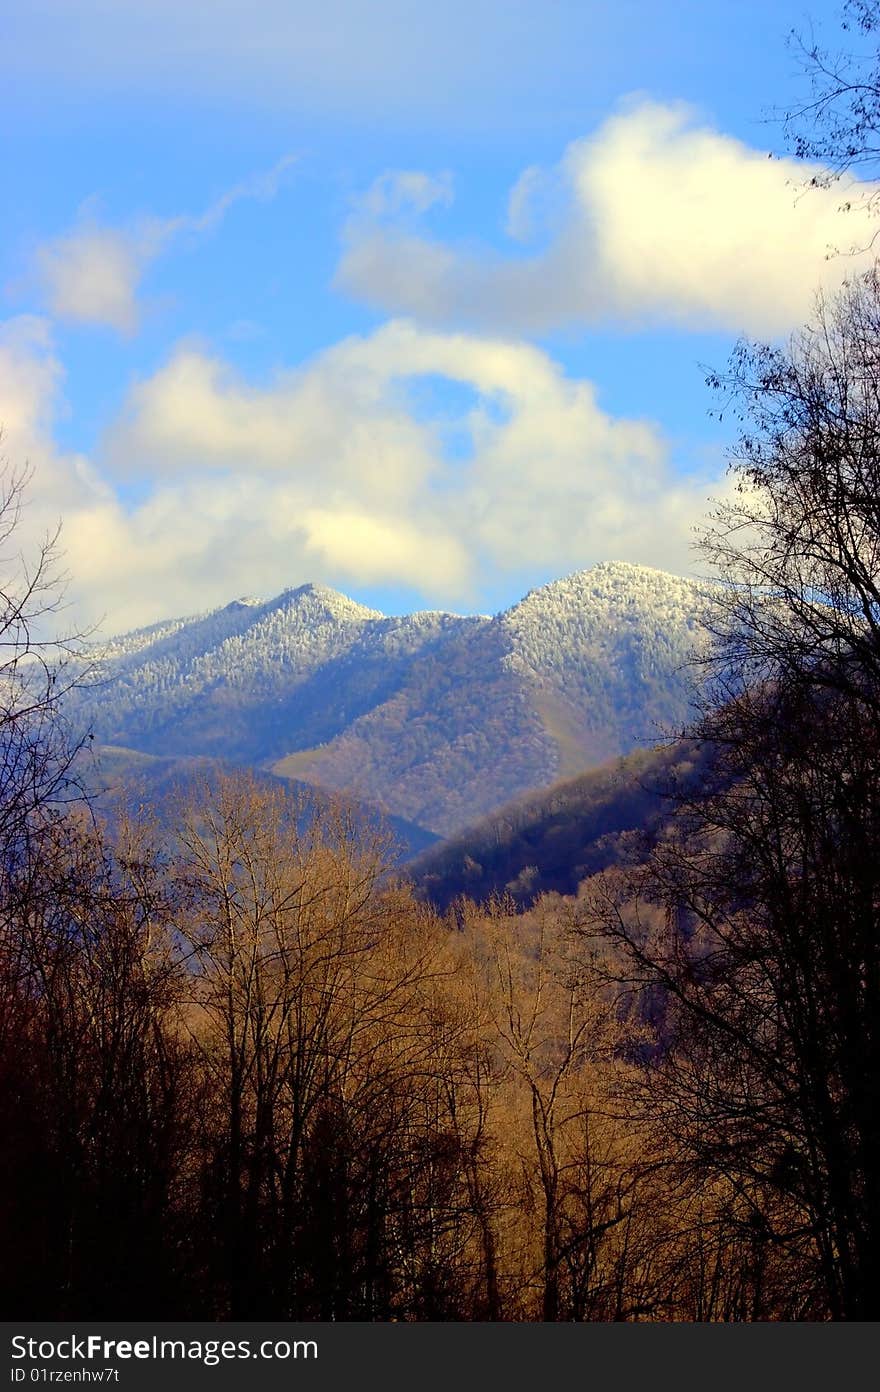 This image was taken using the 450d with the kit lens. The view is the Smokey Mountains. This image was taken using the 450d with the kit lens. The view is the Smokey Mountains.